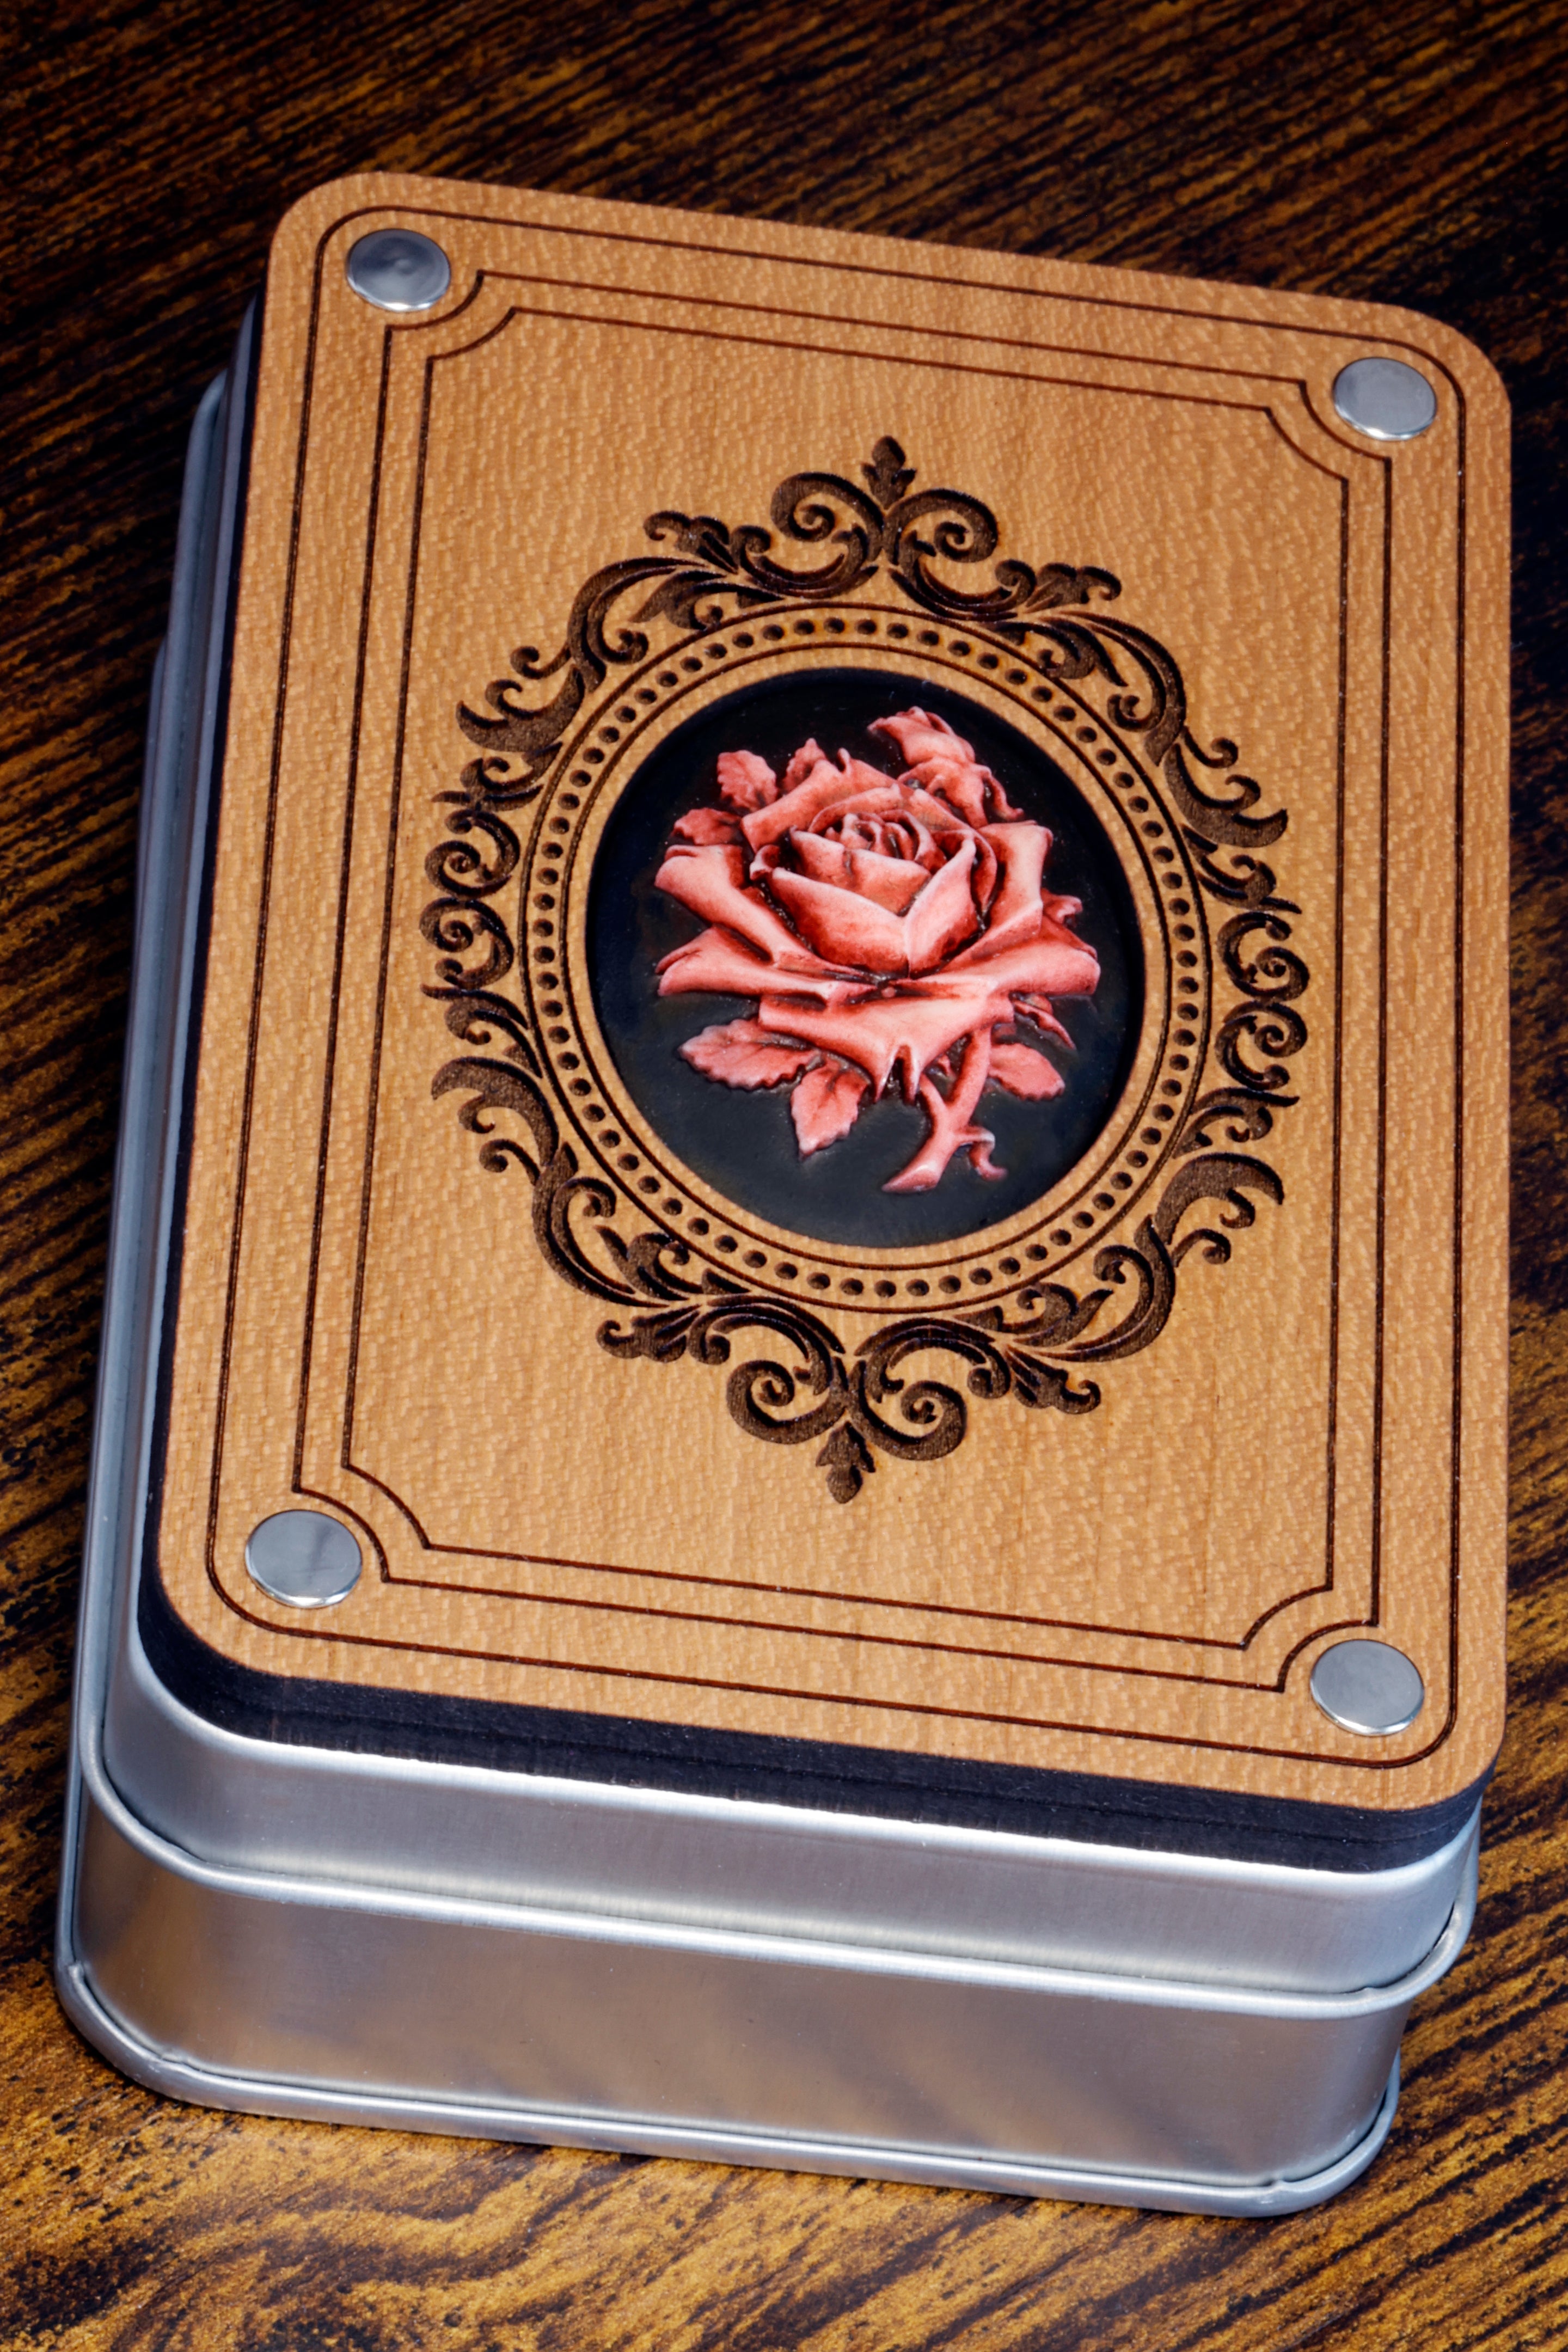 Red Rose dice box and dice wit pink and red flowers - The Wizard's Vault